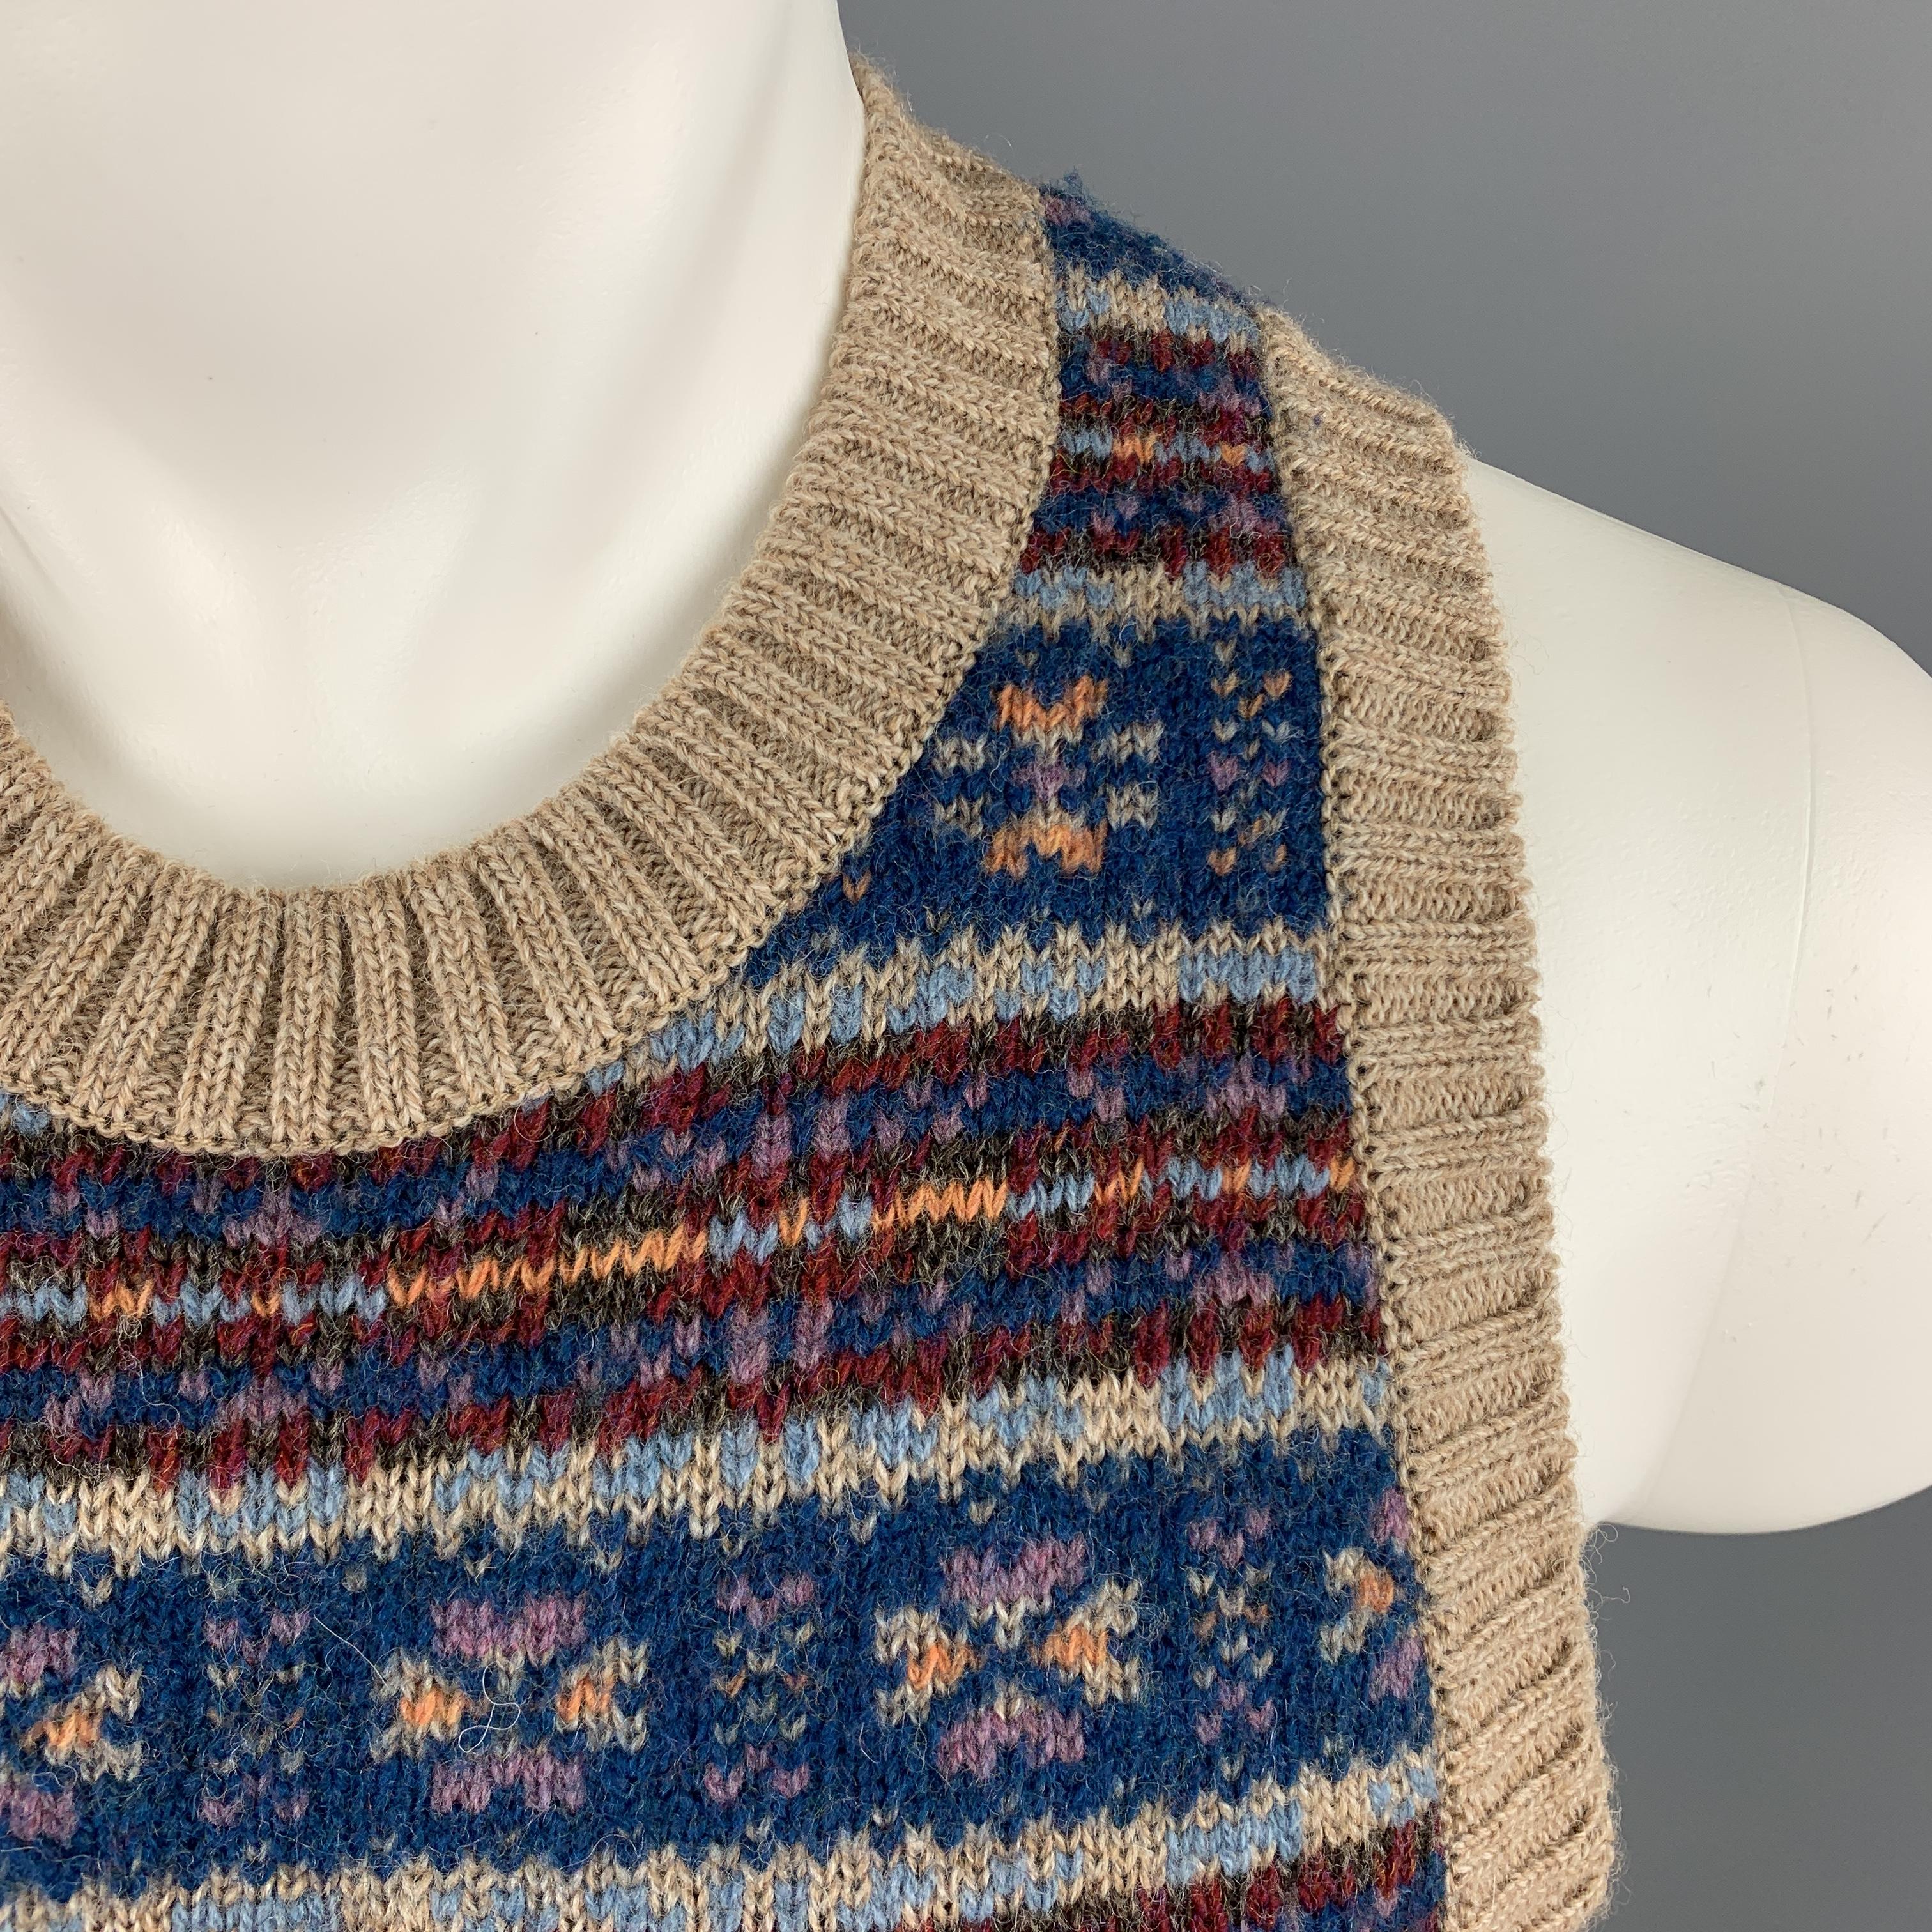 KAPITAL Sweater Vest comes in a multi-color fairisle wool featuring a ribbed crew-neck and front patch pockets. Made in Japan. 

New With Tags.
Marked: 1

Measurements:

Shoulder: 13 in. 
Chest: 31 in. 
Length: 18 in. 